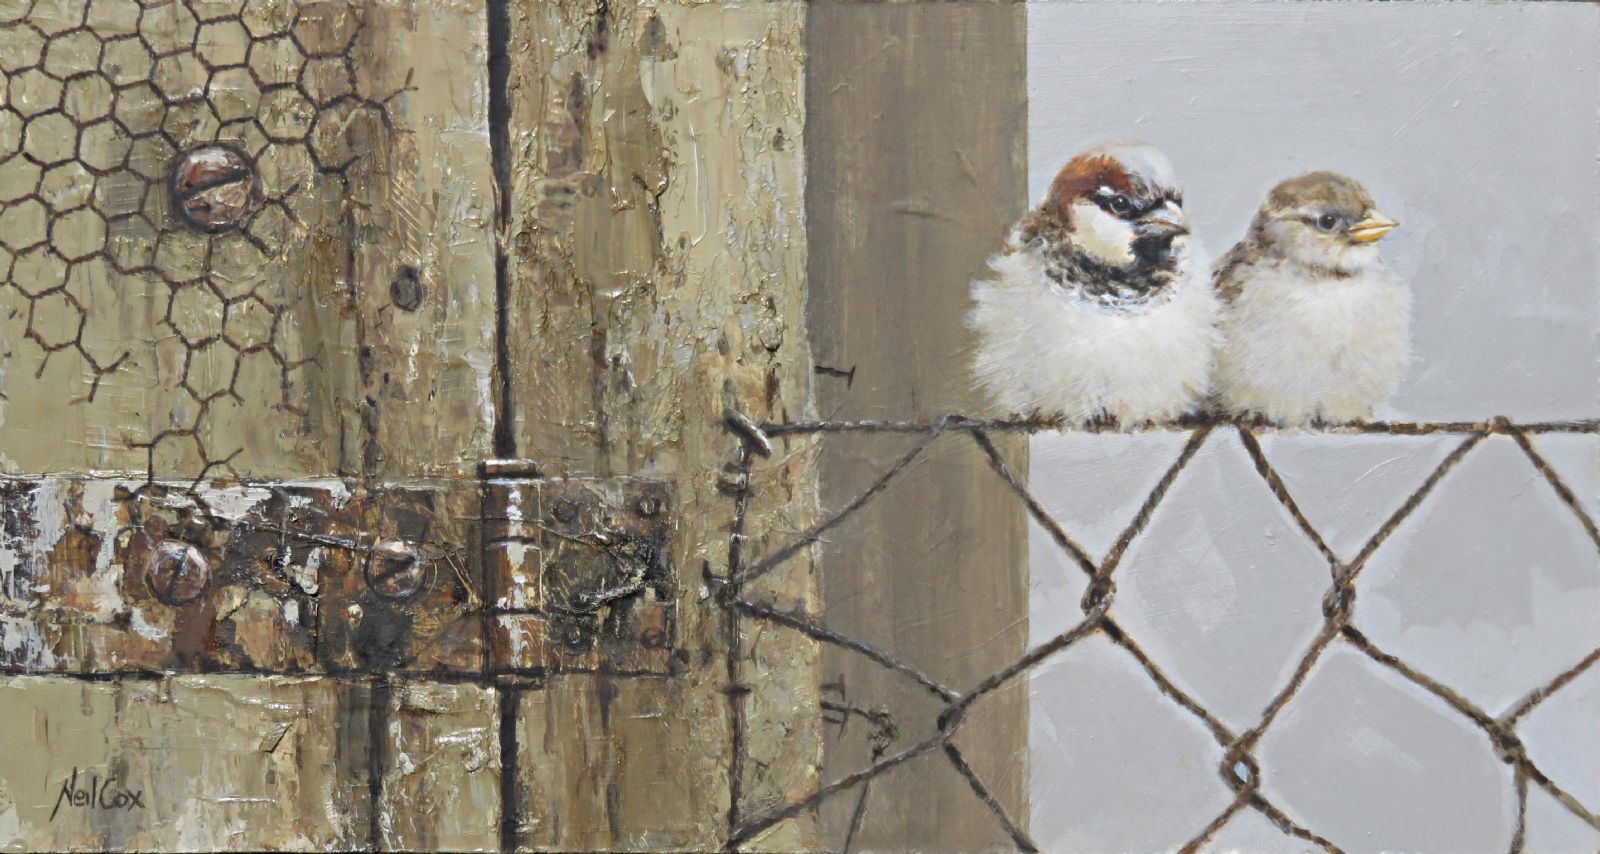 The Happy Couple, House Sparrows by Neil Cox